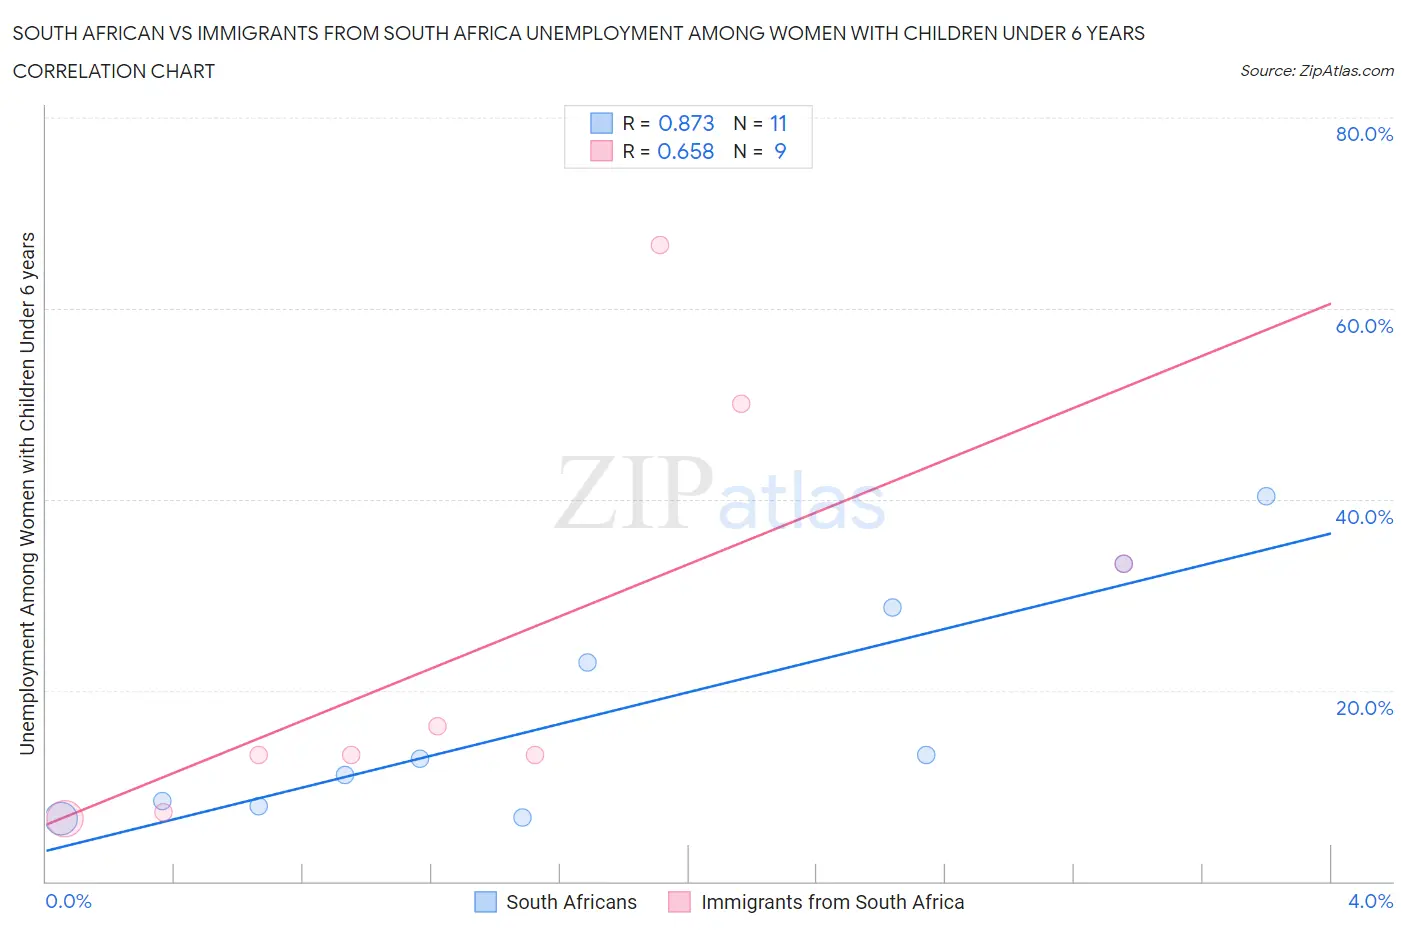 South African vs Immigrants from South Africa Unemployment Among Women with Children Under 6 years